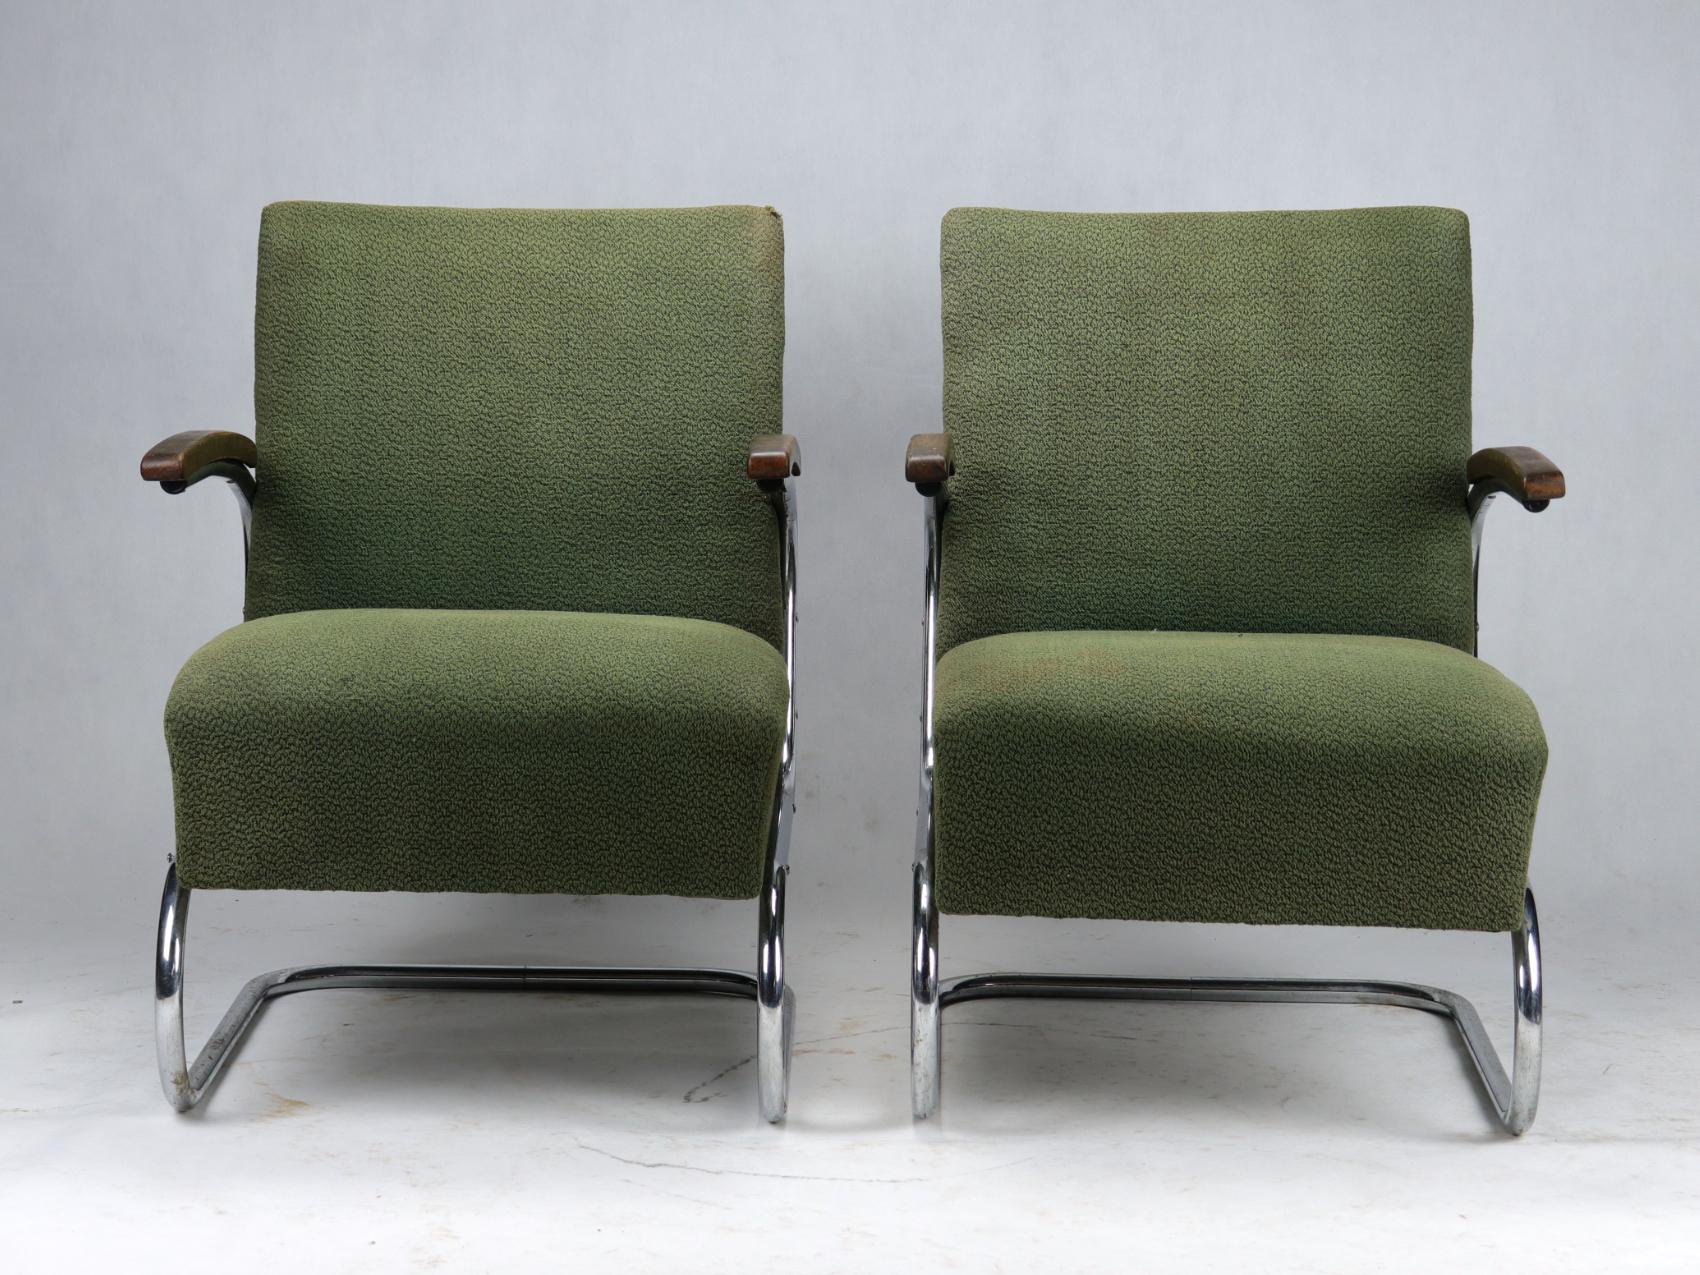 Pair of model armchairs, model S411 by Thonet circa 1930s Bauhaus period. Upholstery and nickel-plated tubular steel construction in original condition. The chrome at the bottom is lightly corroded in some places, but at its age they are in very